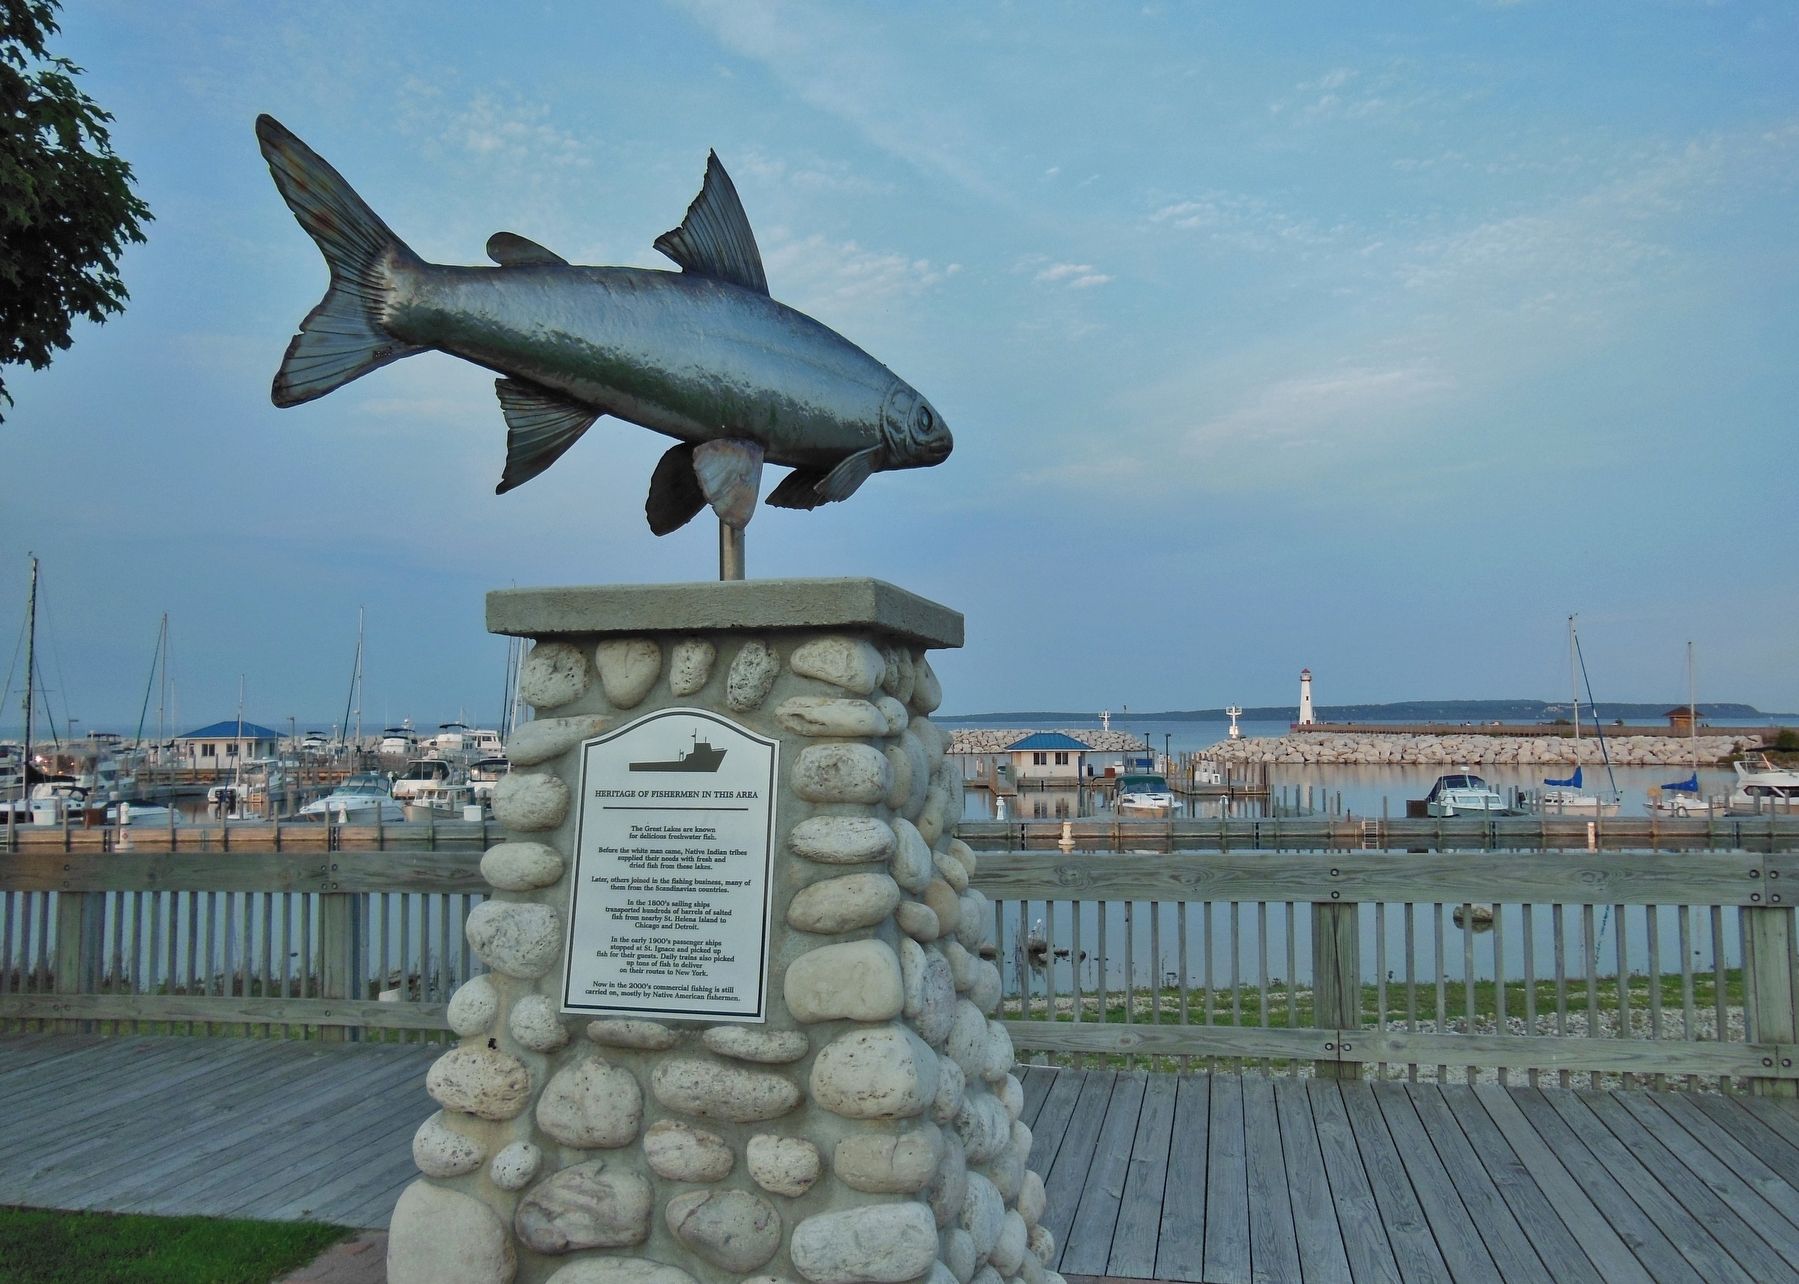 Heritage of Fishermen in this Area Marker (<i>wide view; St. Ignace Marina in background</i>) image. Click for full size.